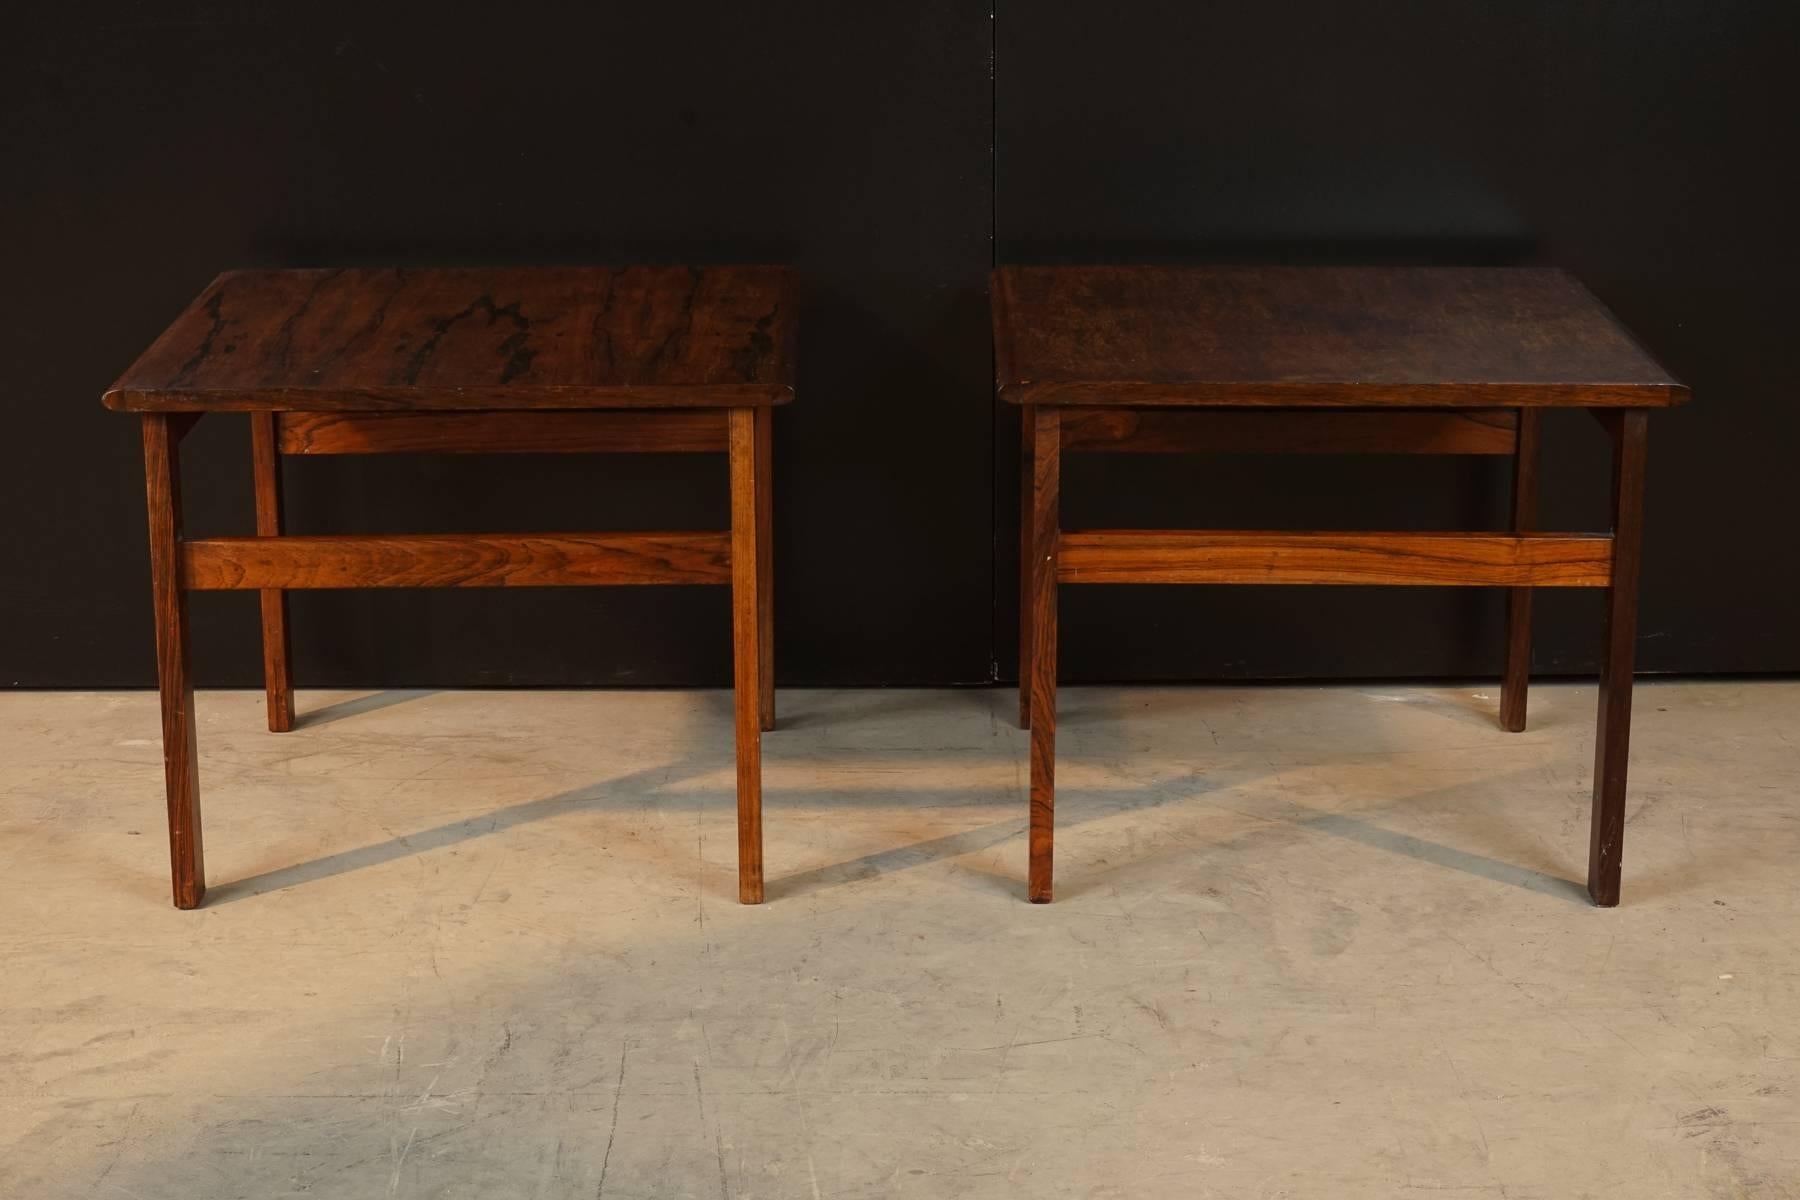 Pair of rosewood side tables from Denmark, circa 1960.